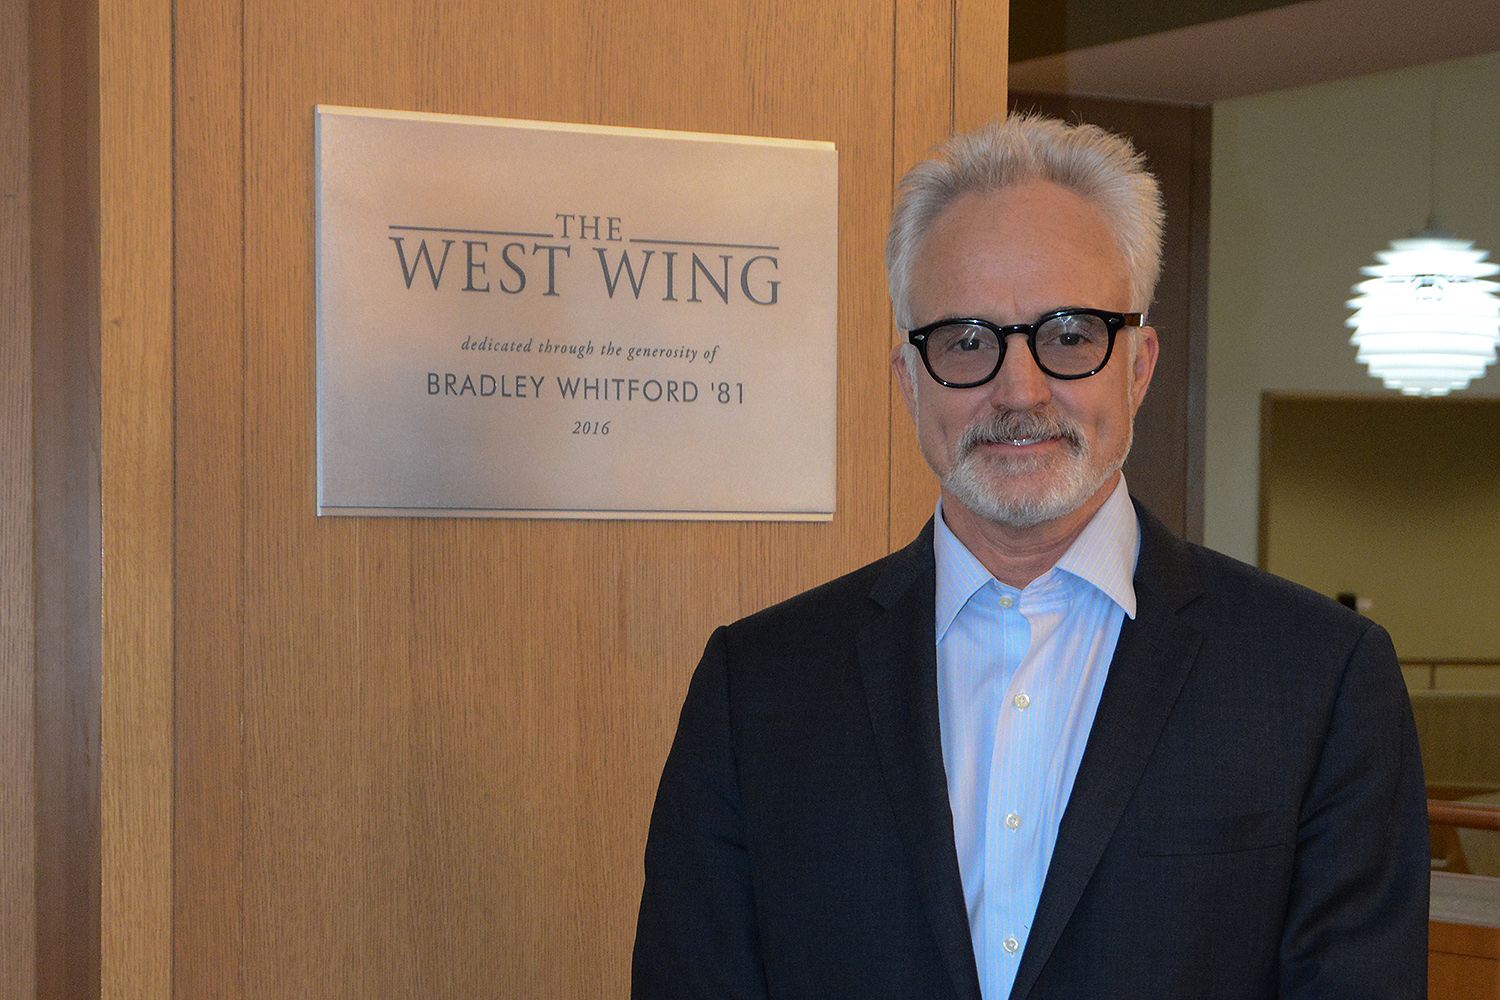 Bradley Whitford, an actor, played White House Deputy Chief of Staff Josh Lyman on the NBC television drama The West Wing. Whitford was nominated for three consecutive Emmy Awards from 2001 to 2003 for Outstanding Supporting Actor in a Drama Series for his role on The West Wing, winning the award in 2001. He received a second Emmy Award in 2015 for his role in Transparent.